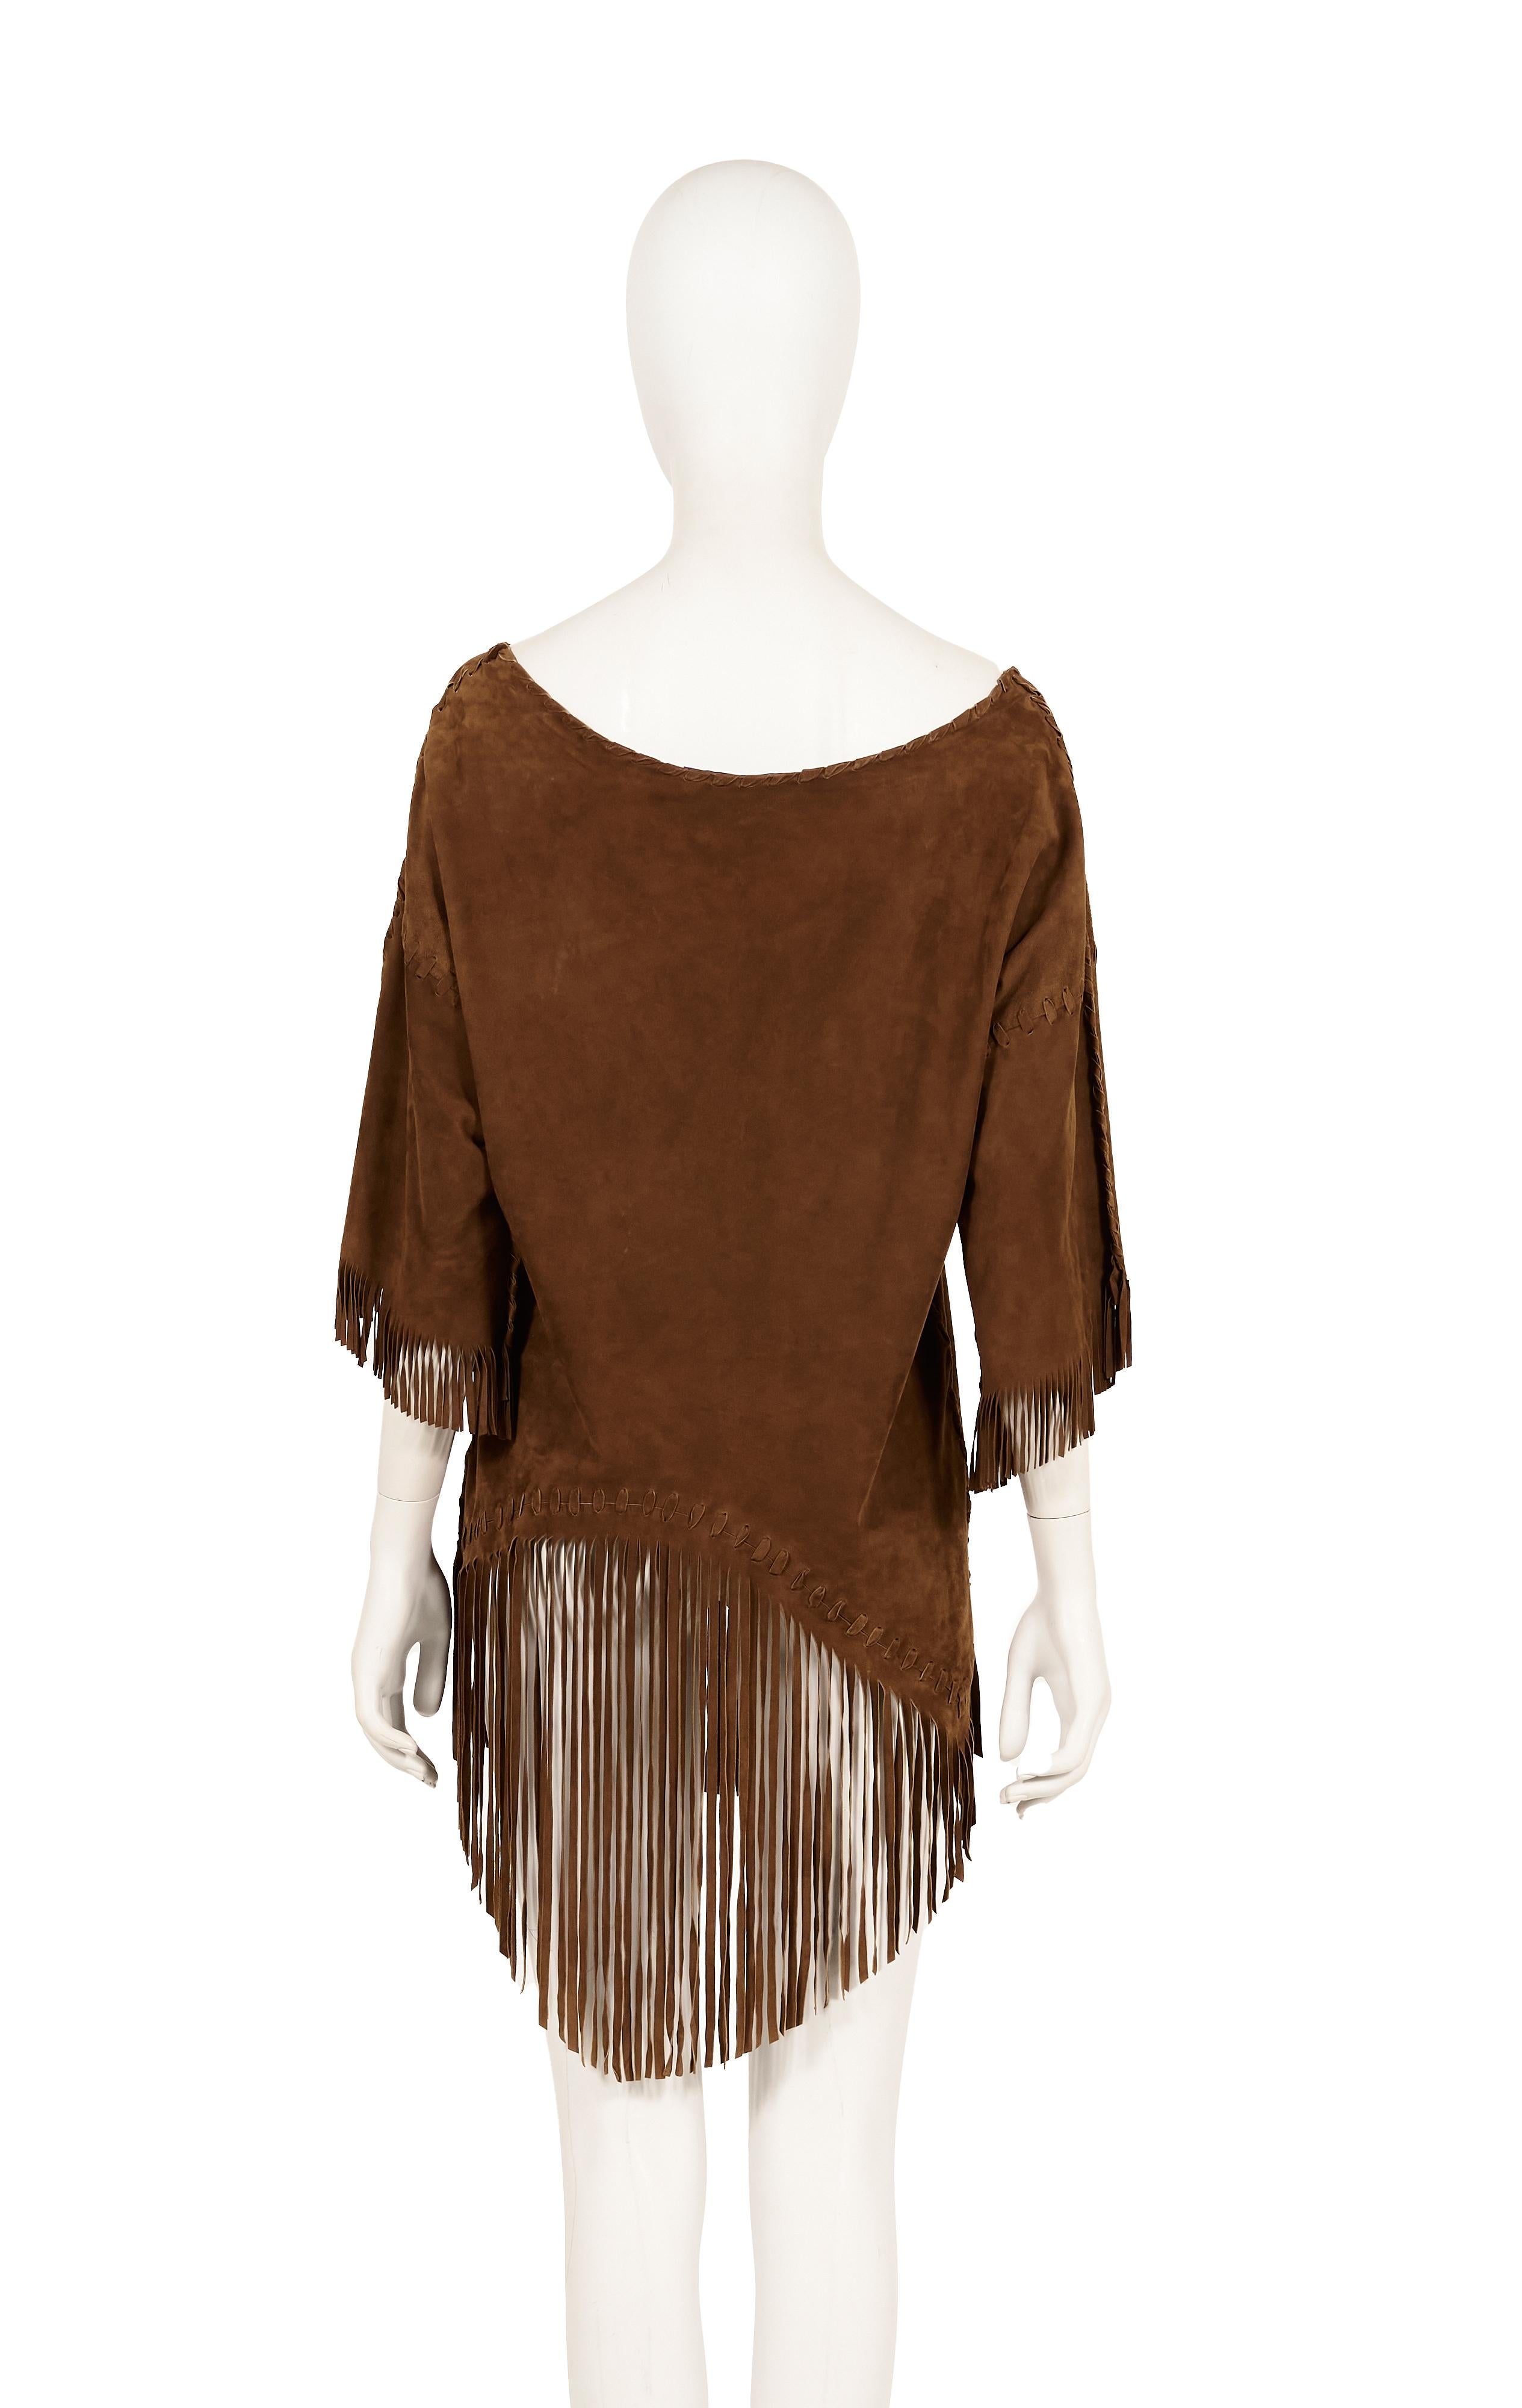 Ralph Lauren S/S 2011 brown suede asymmetrical fringe top In Good Condition For Sale In Rome, IT